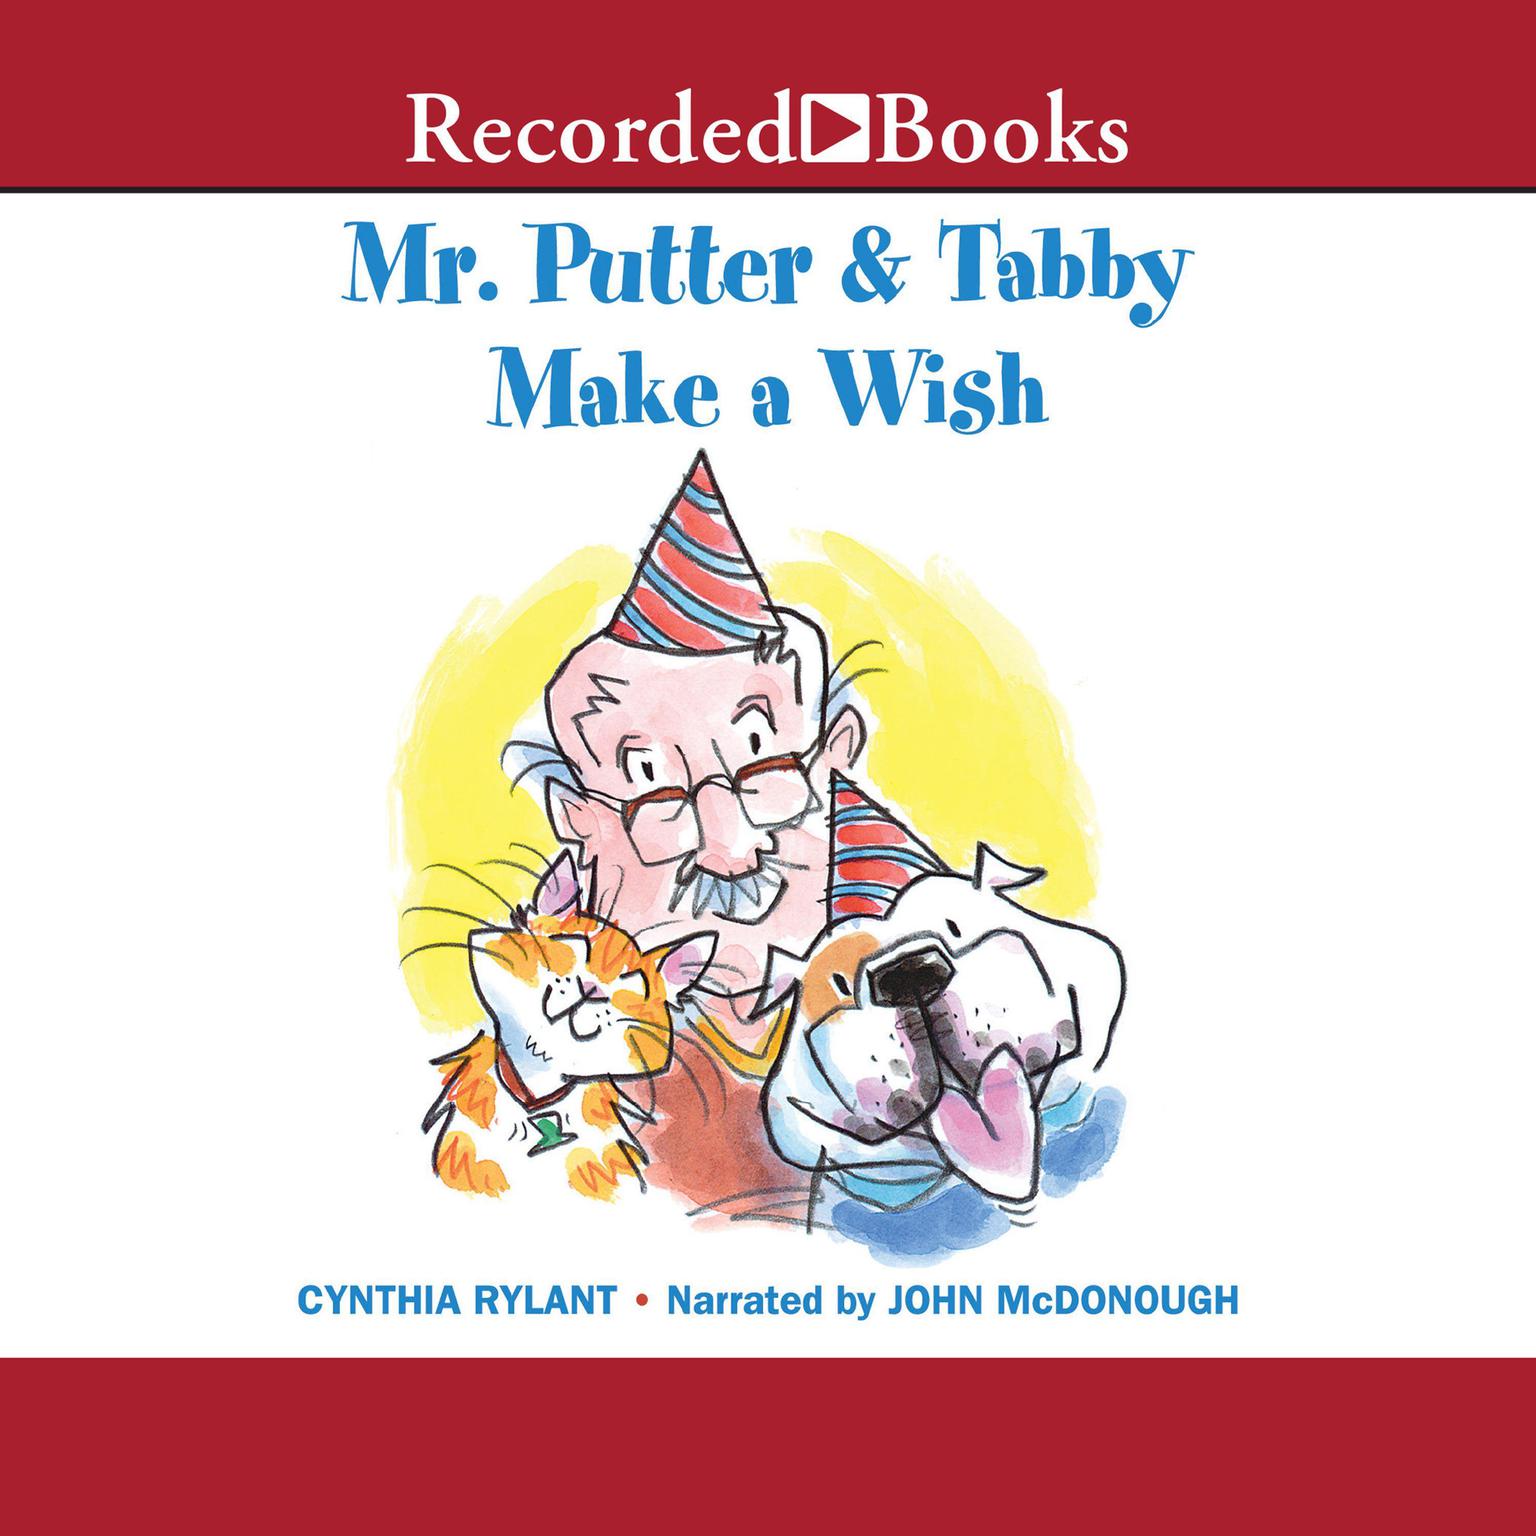 Mr. Putter & Tabby Make a Wish Audiobook, by Cynthia Rylant